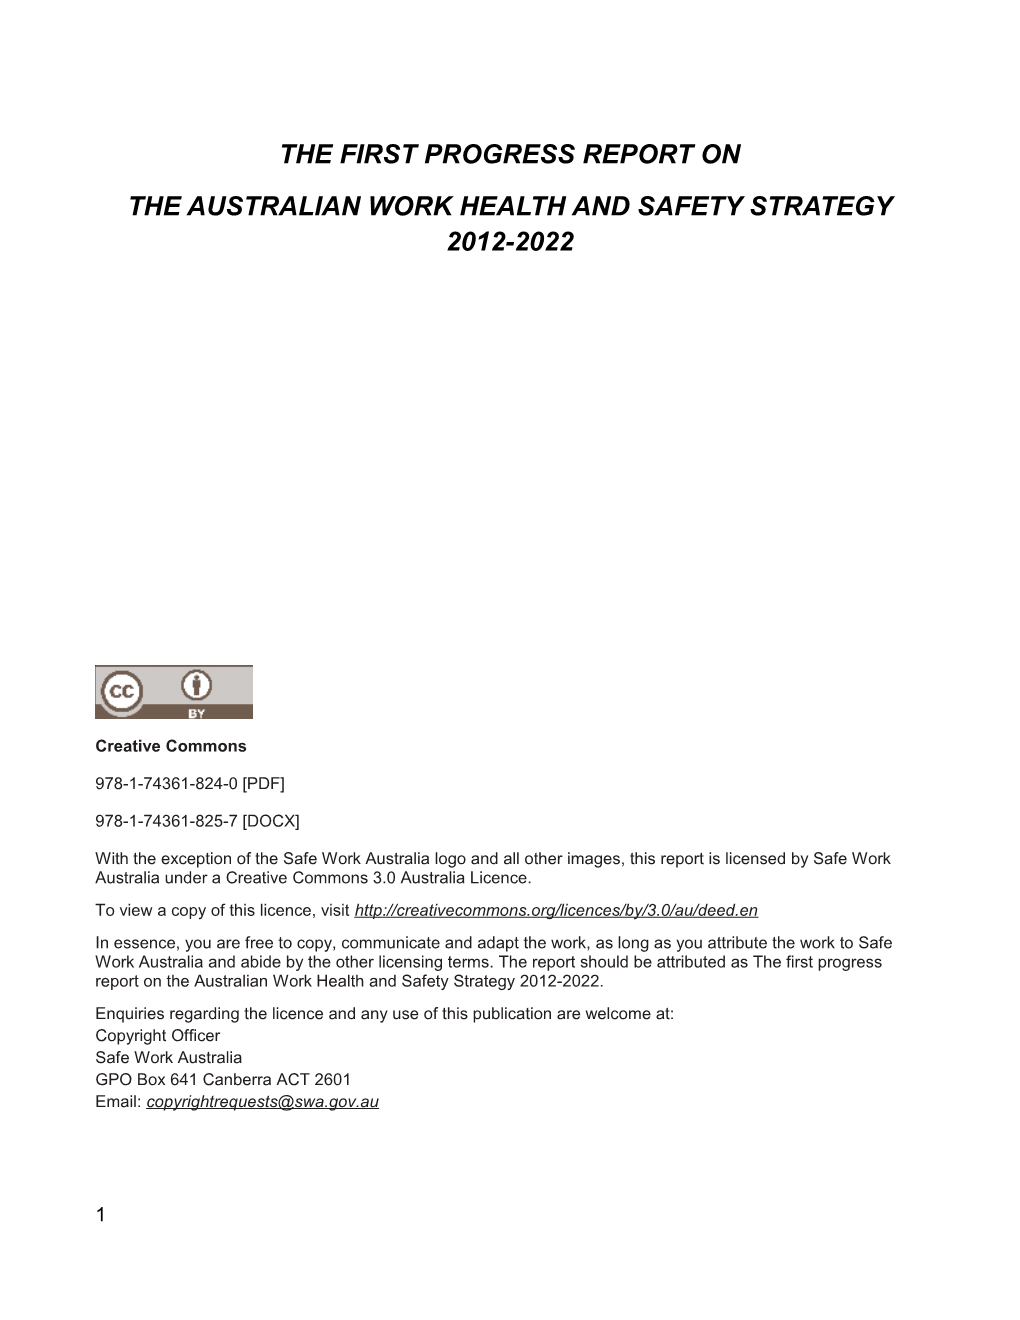 The First Progress Report on the Australian Work Health and Safety Strategy 2012-2022